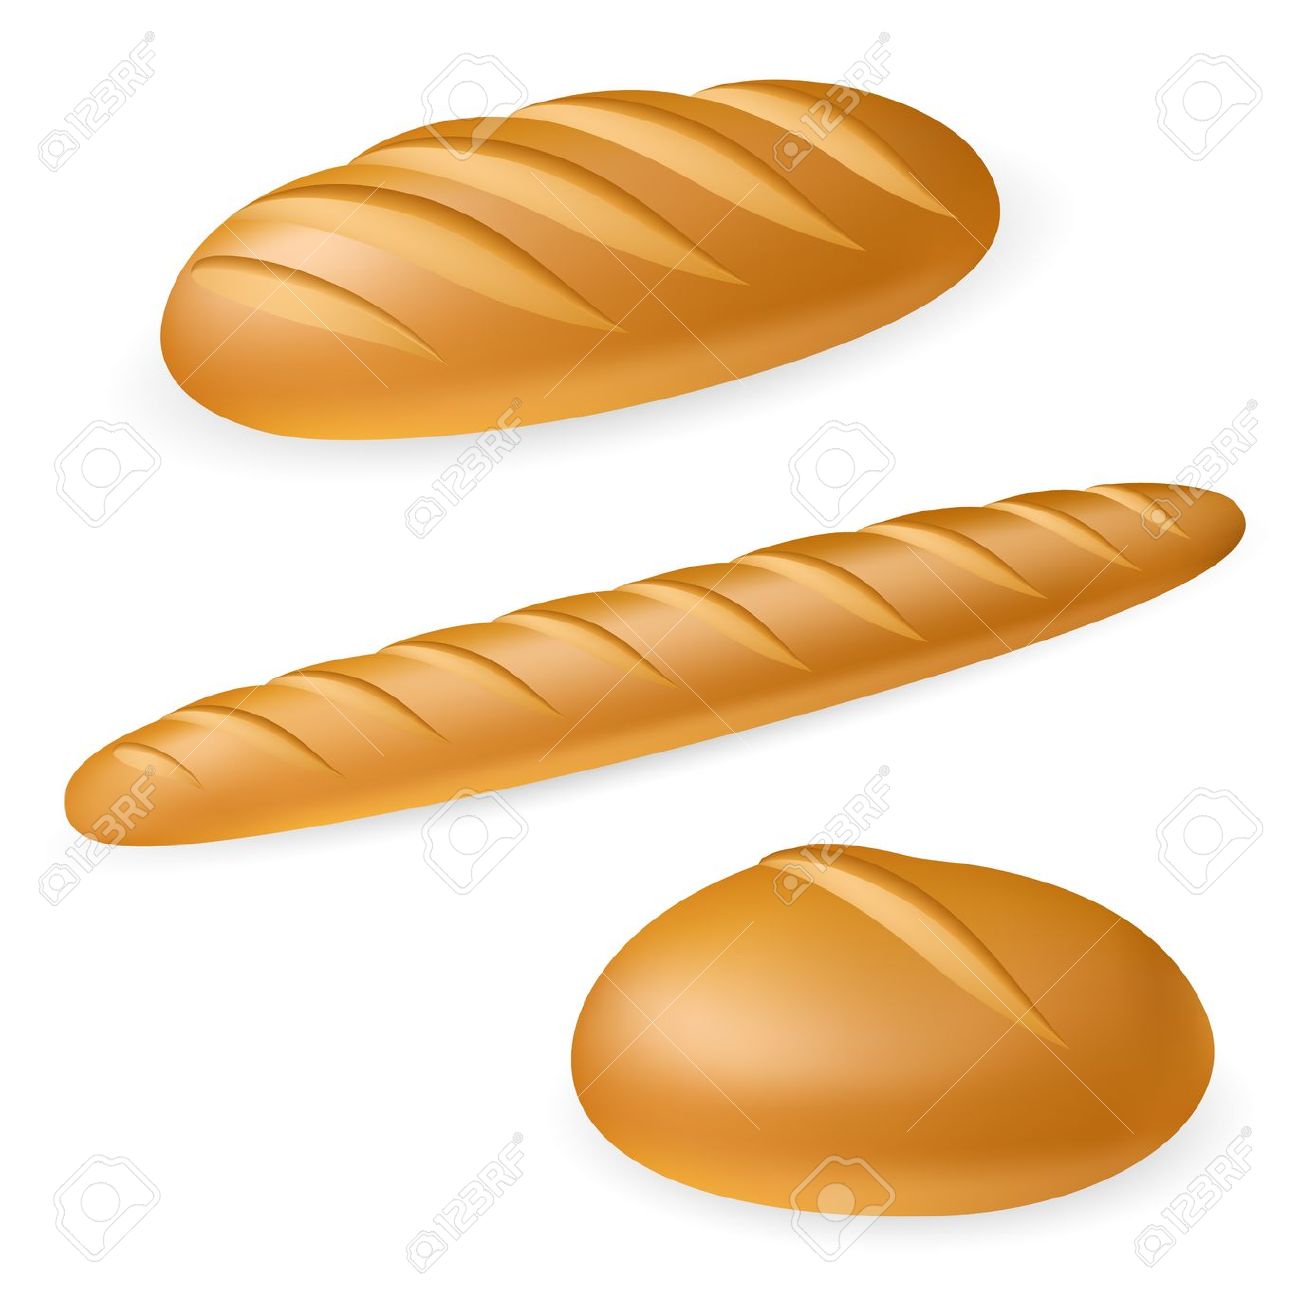 7,715 French Bread Stock Illustrations, Cliparts And Royalty Free.